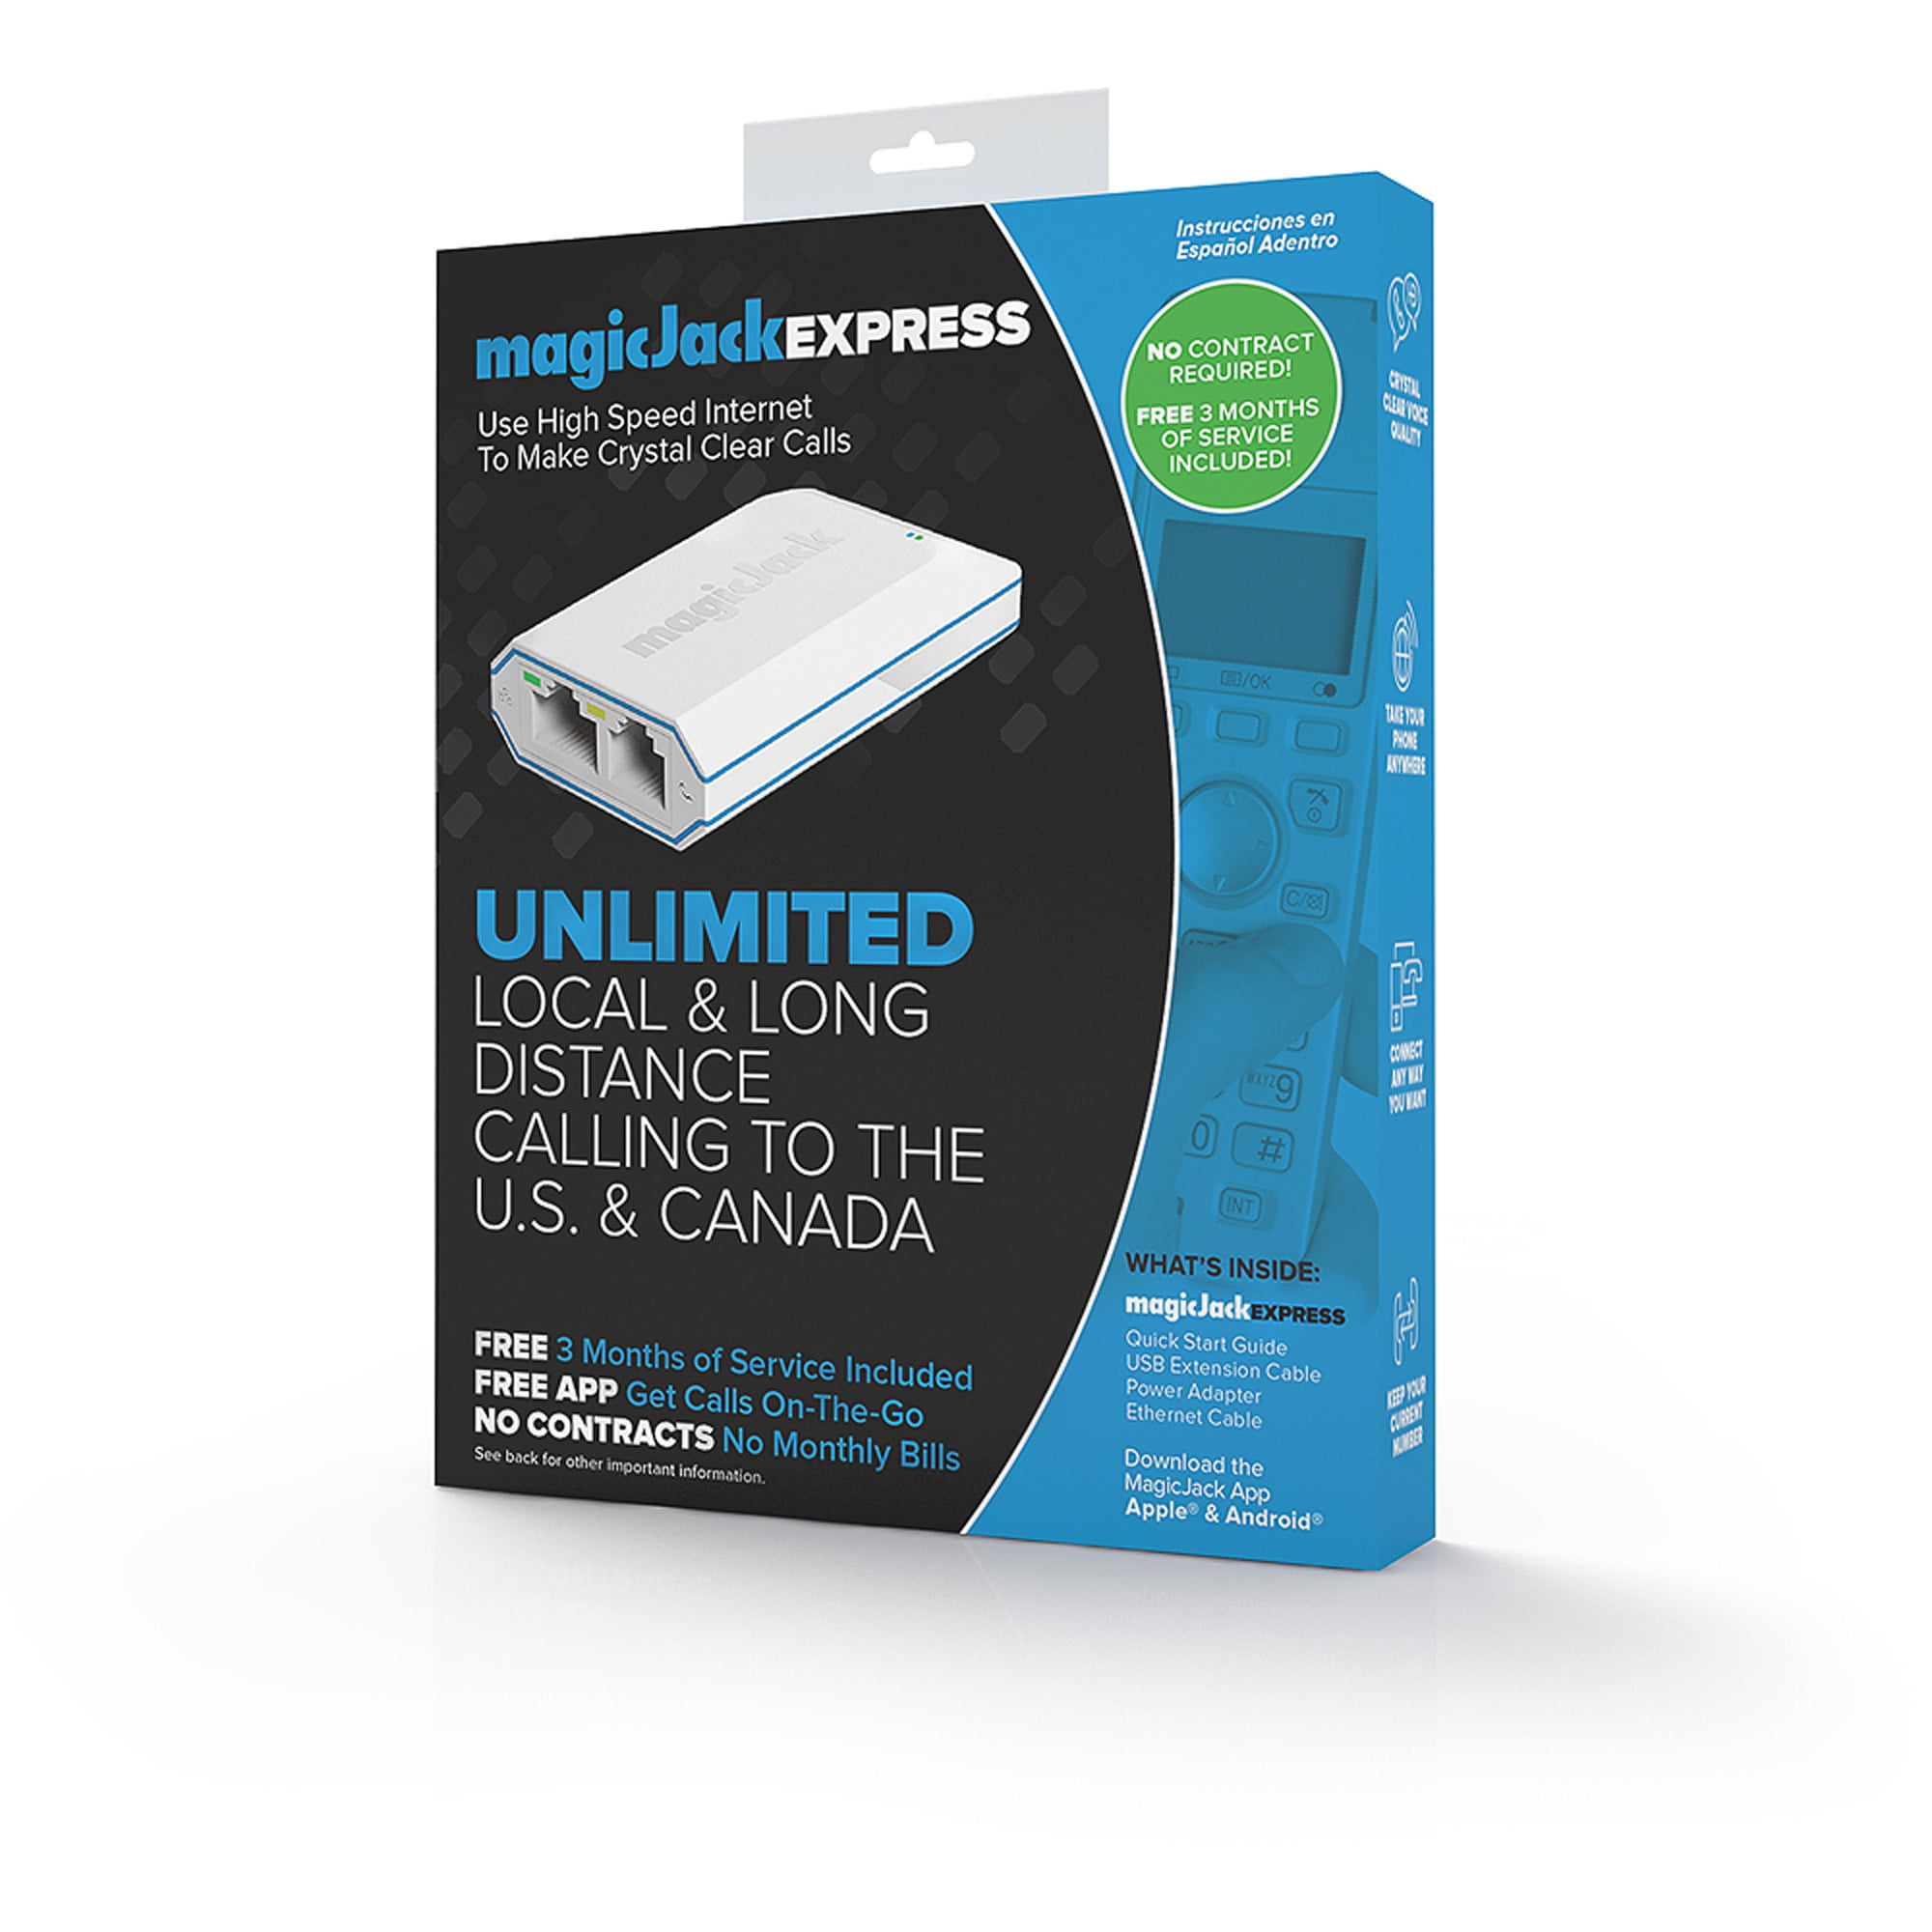 Is Internet access required for magicJack to work?